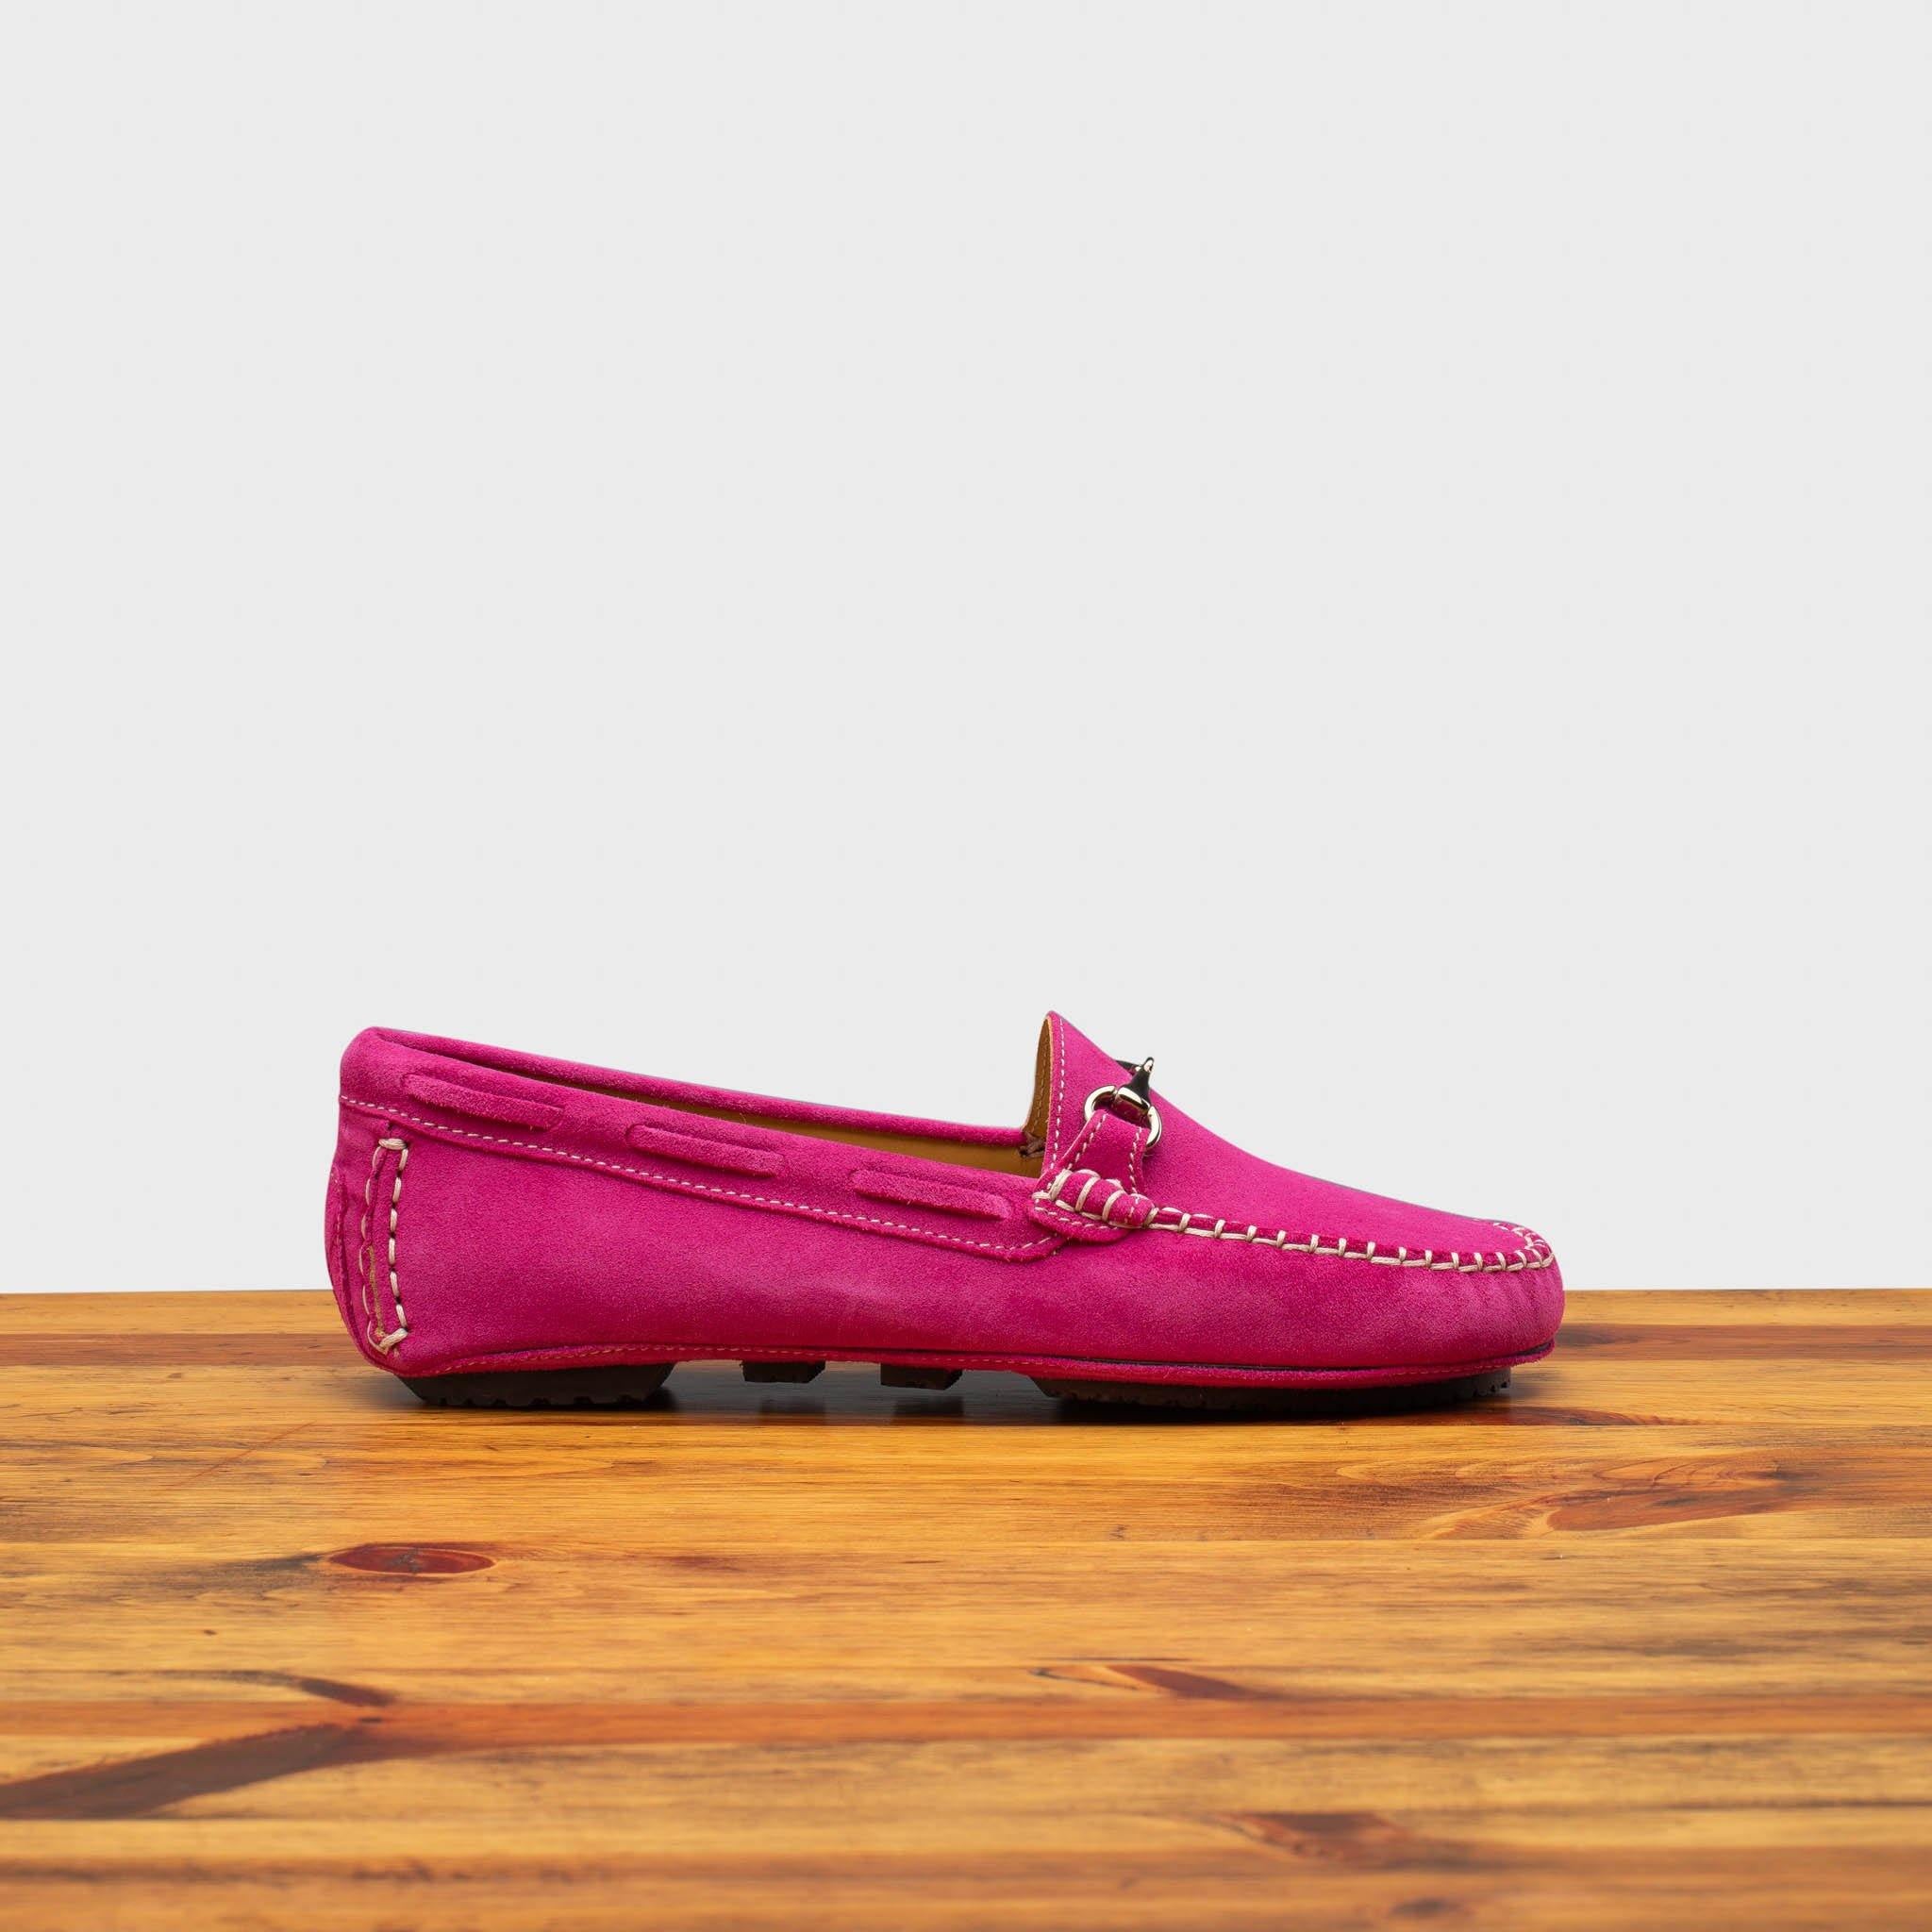 Side profile of 8976 Calzoleria Toscana Women's Fuschia Suede Driver on top of a wooden table